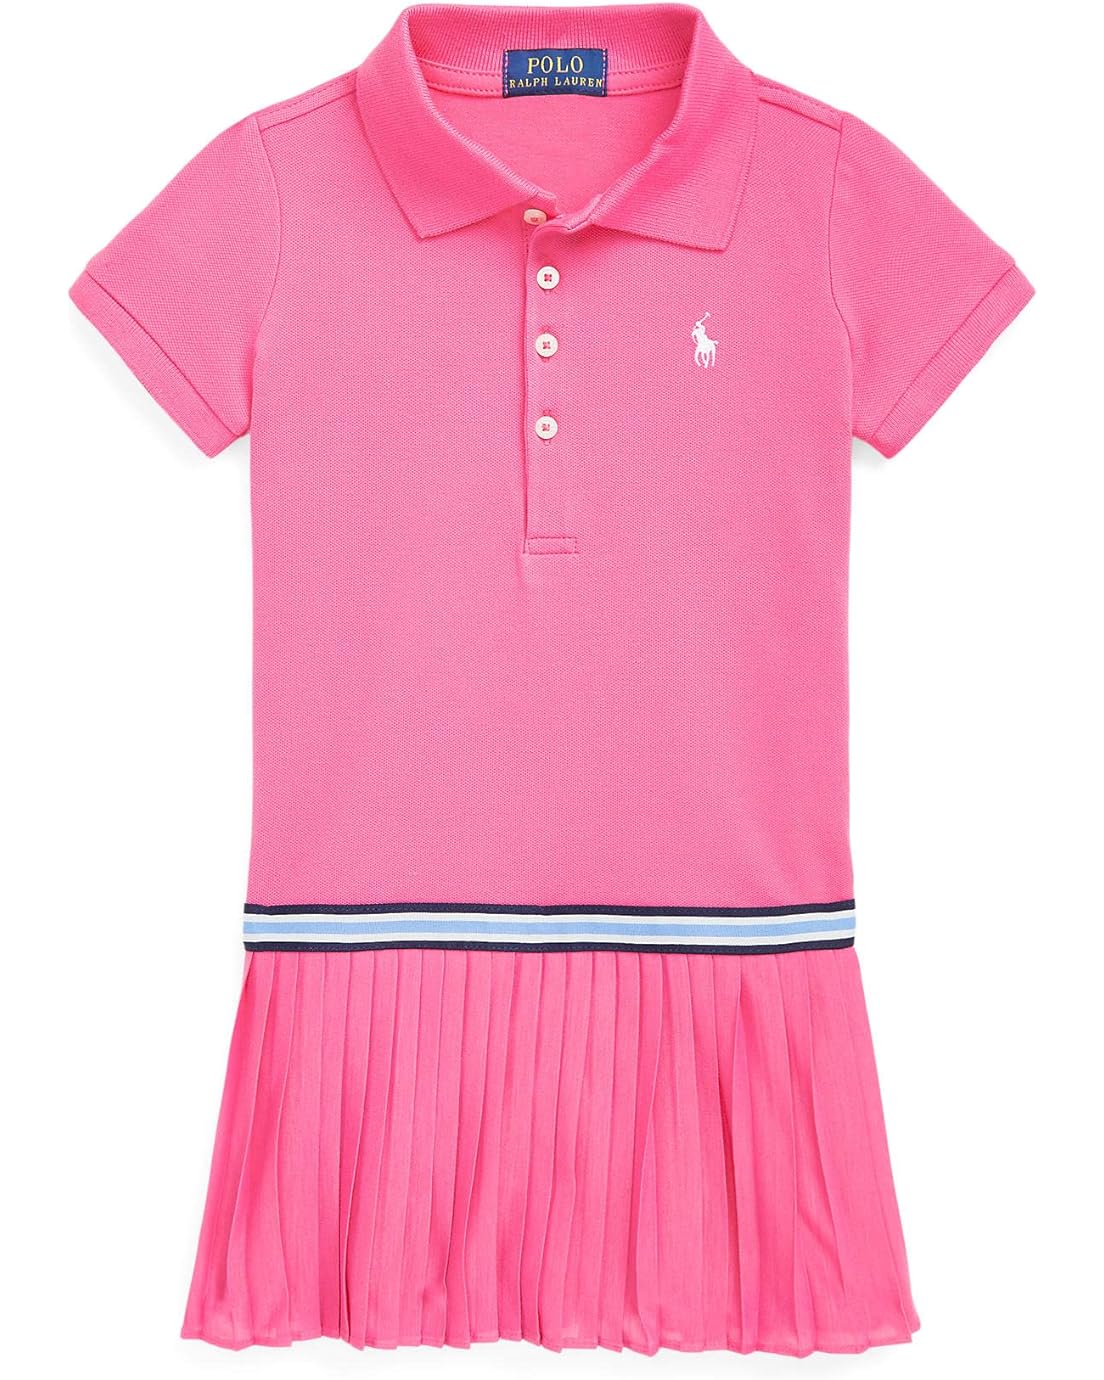 Polo Ralph Lauren Kids Pleated Stretch Mesh Polo Dress (Toddler)